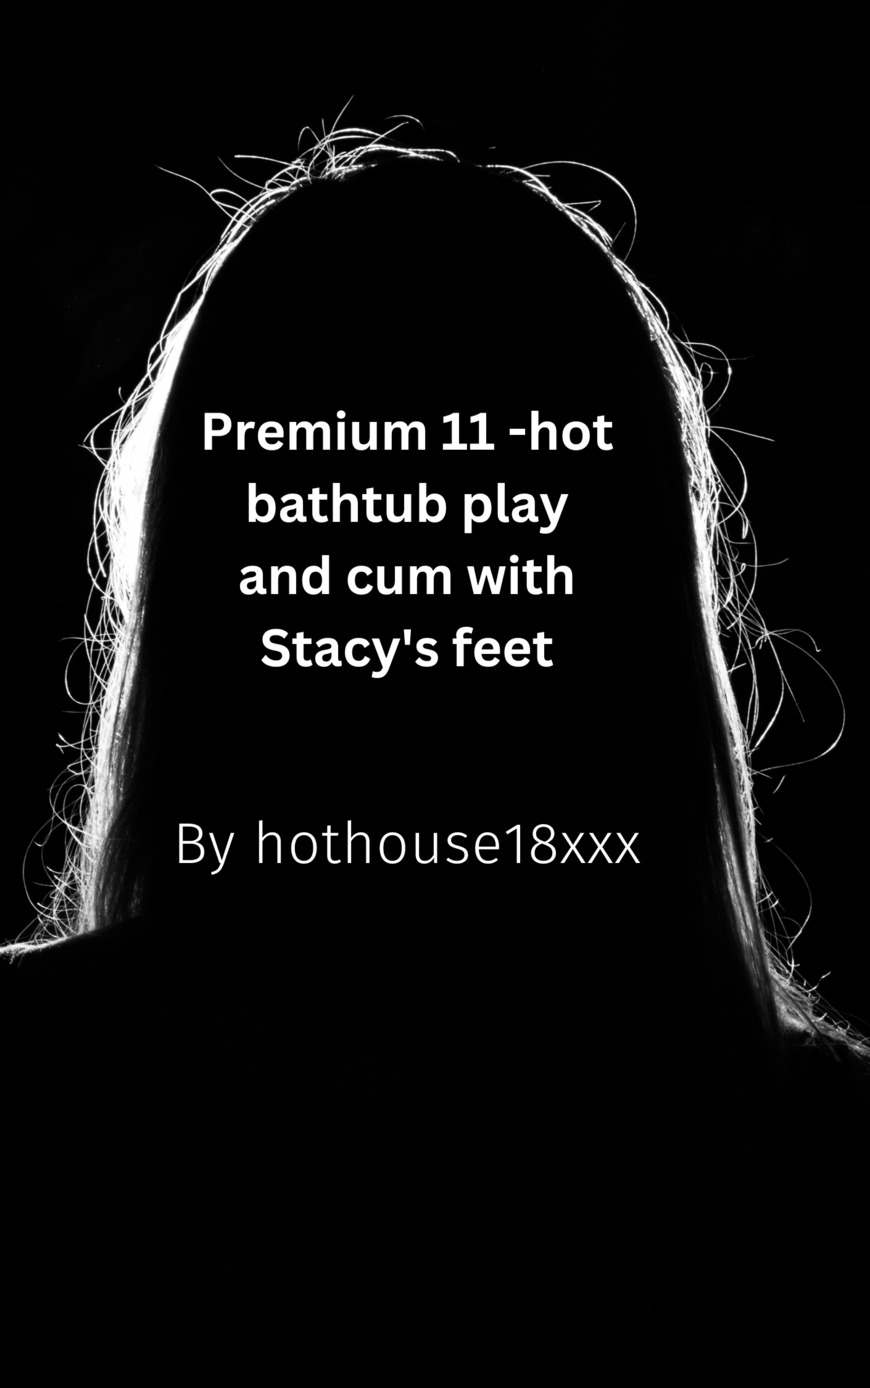 Premium 11 -hot bathtub play and cum with Stacy's feet - clip coverforeground